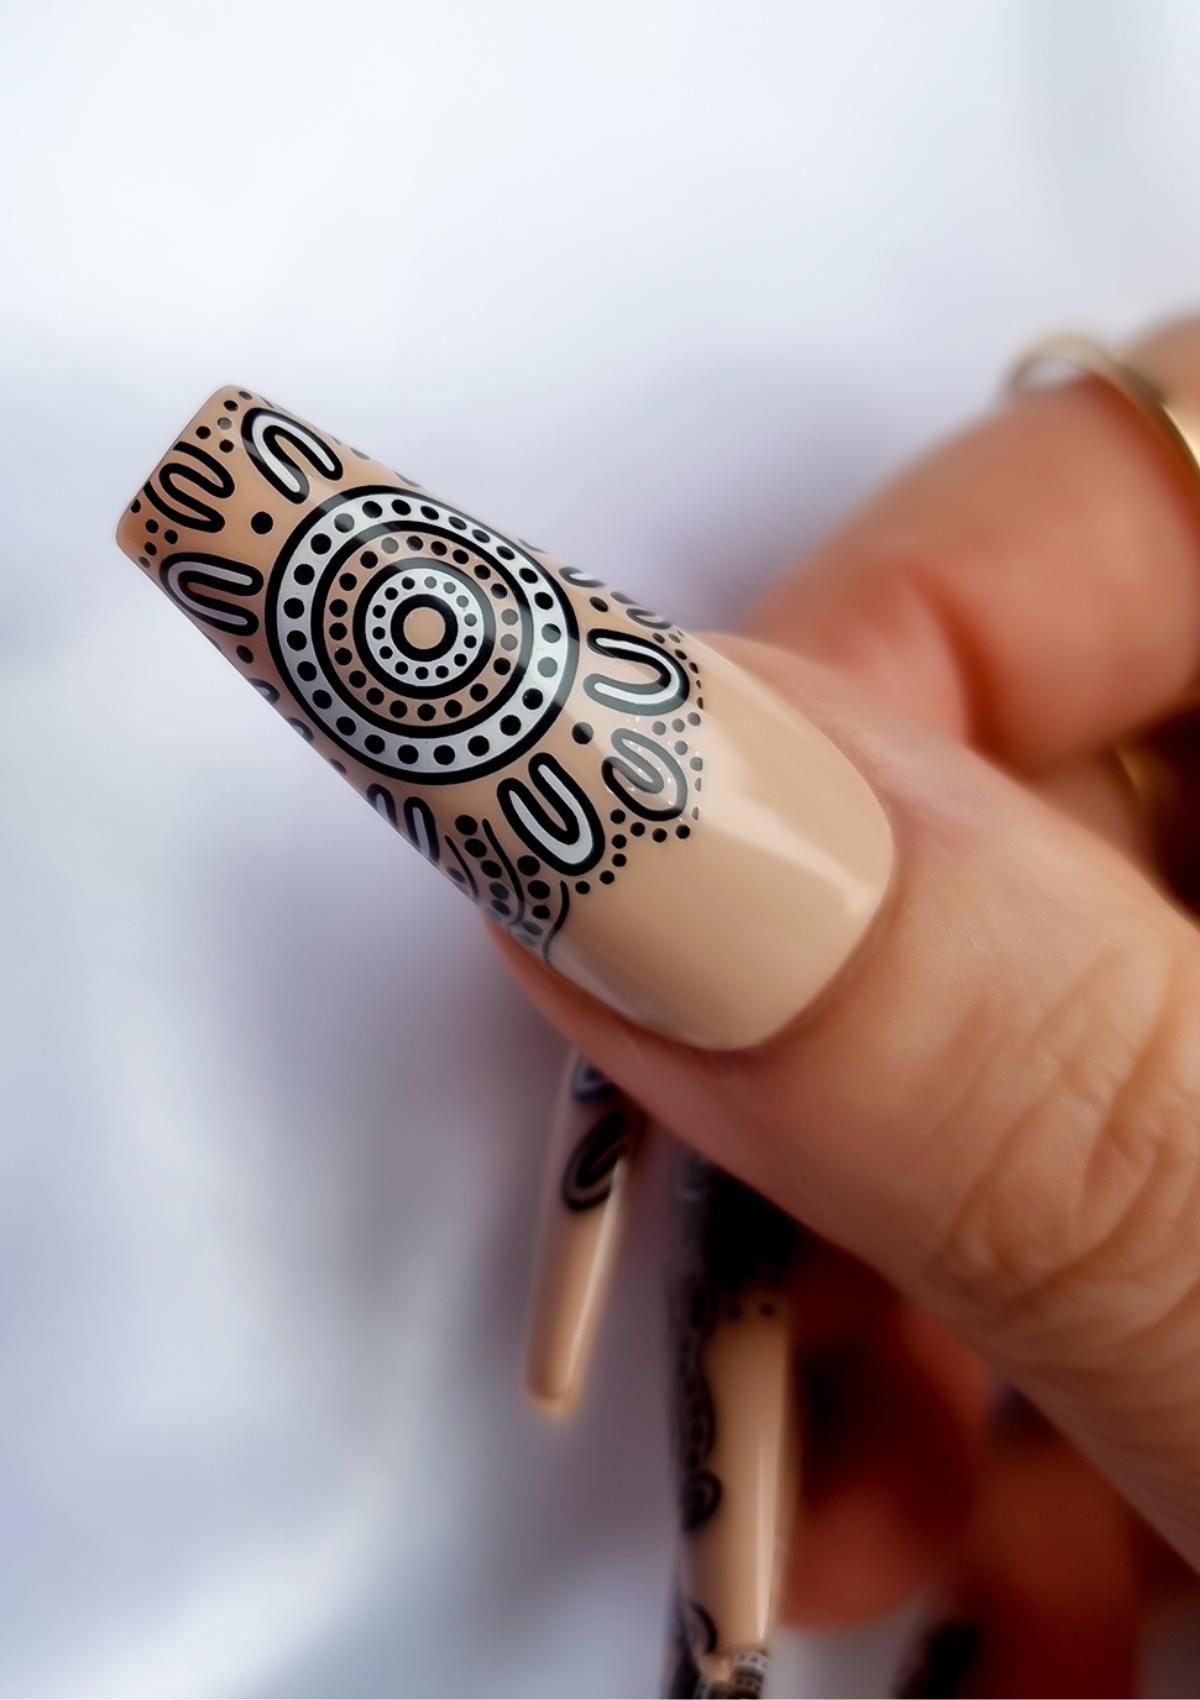 Nude nail with black and white Aboriginal Australian nail art designs